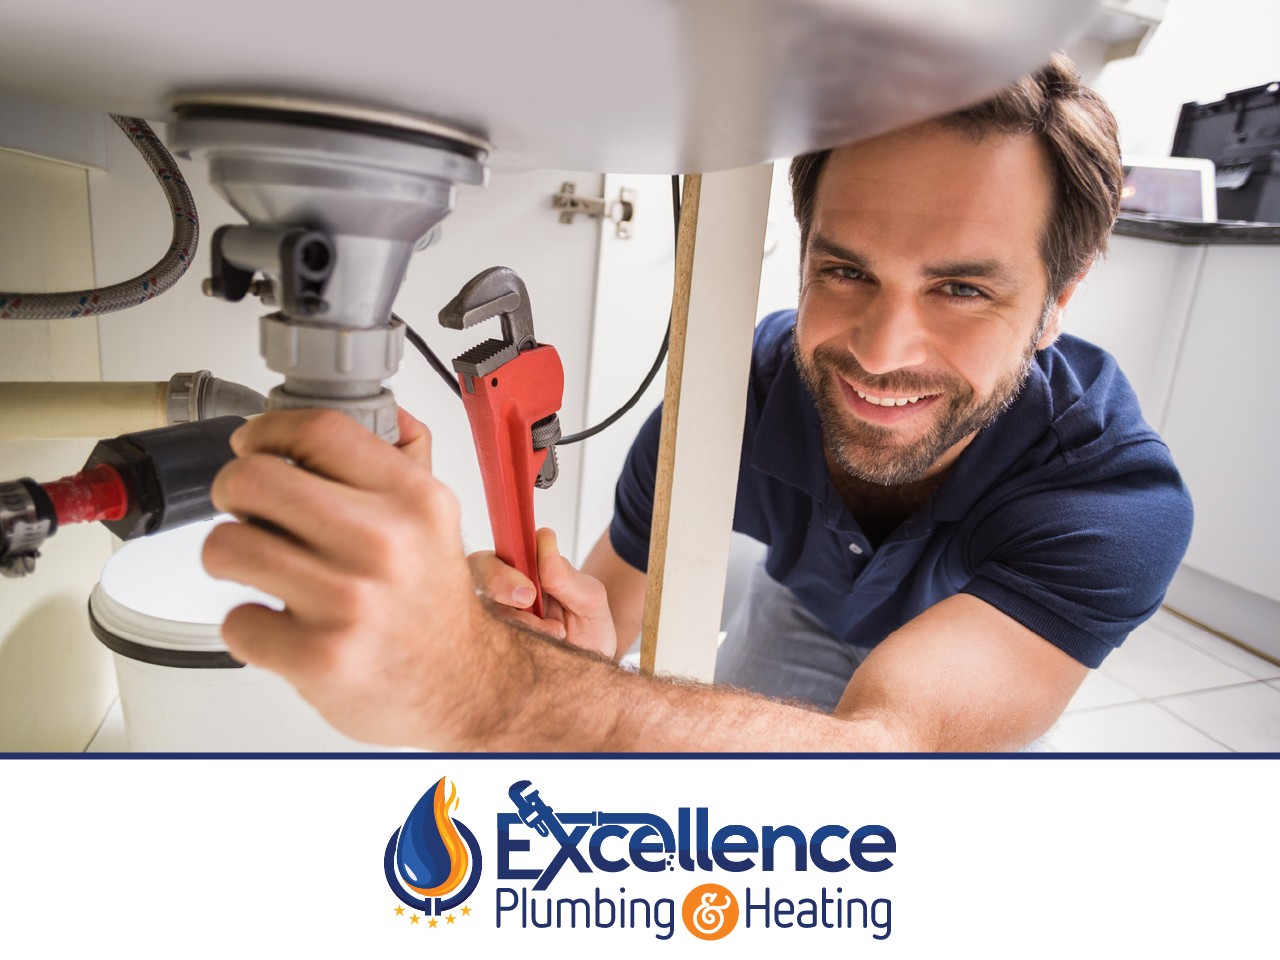 Innovative Heating Excellence: Excellence Plumbing Service Union Sets the Standard